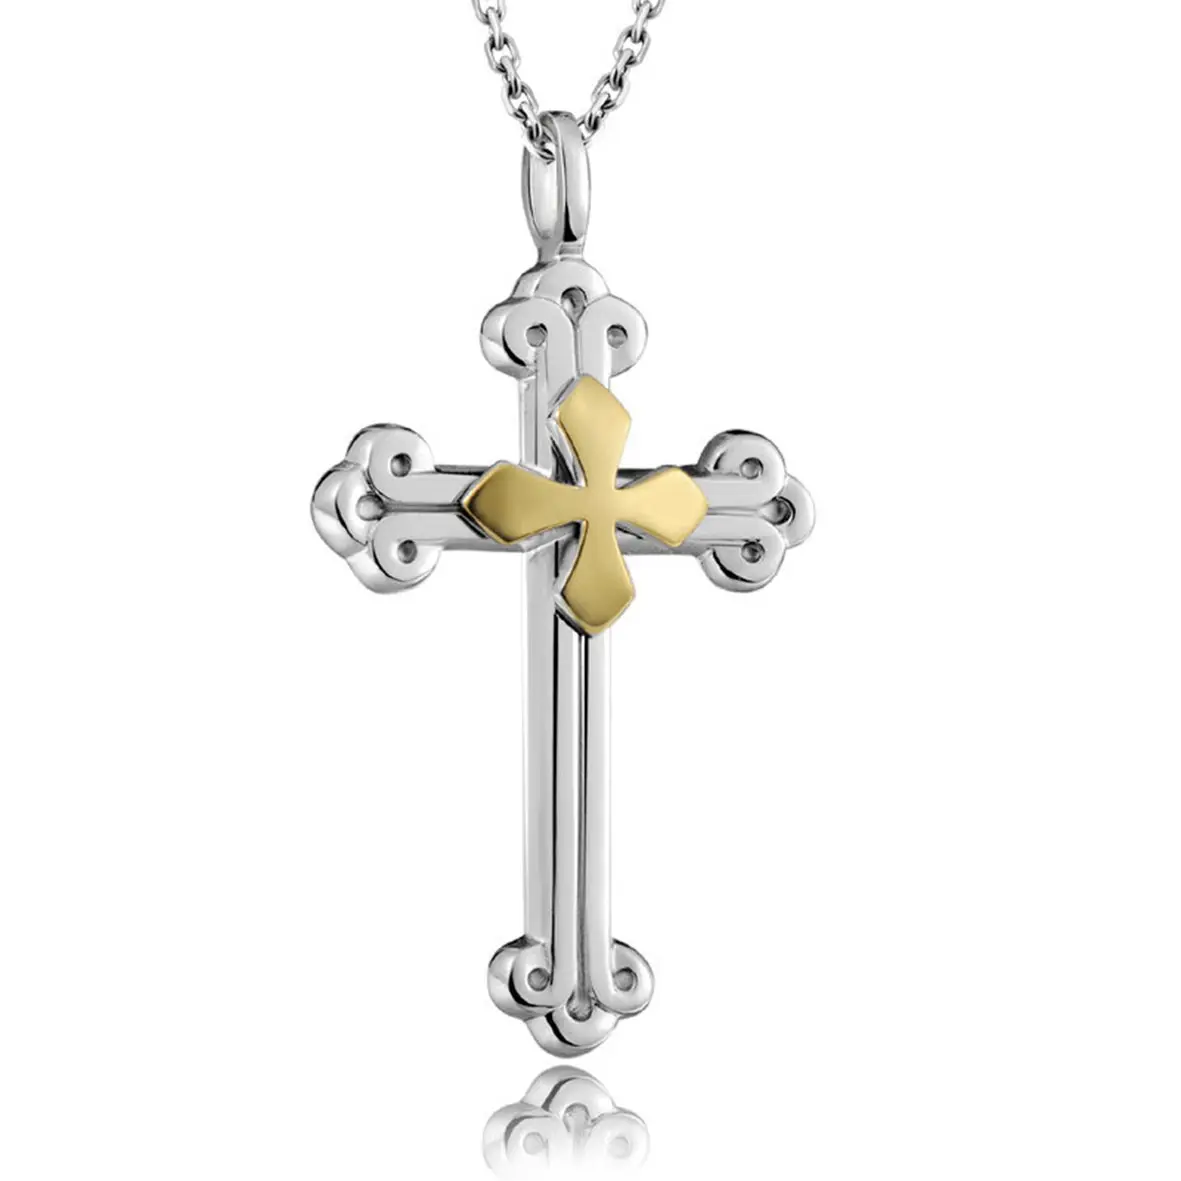 Women'S Compact Exquisite Jewelry Silver Plated Maltese Cross Men'S Stainless Steel Chain Crucifix Bible Prayer Pendant Necklace